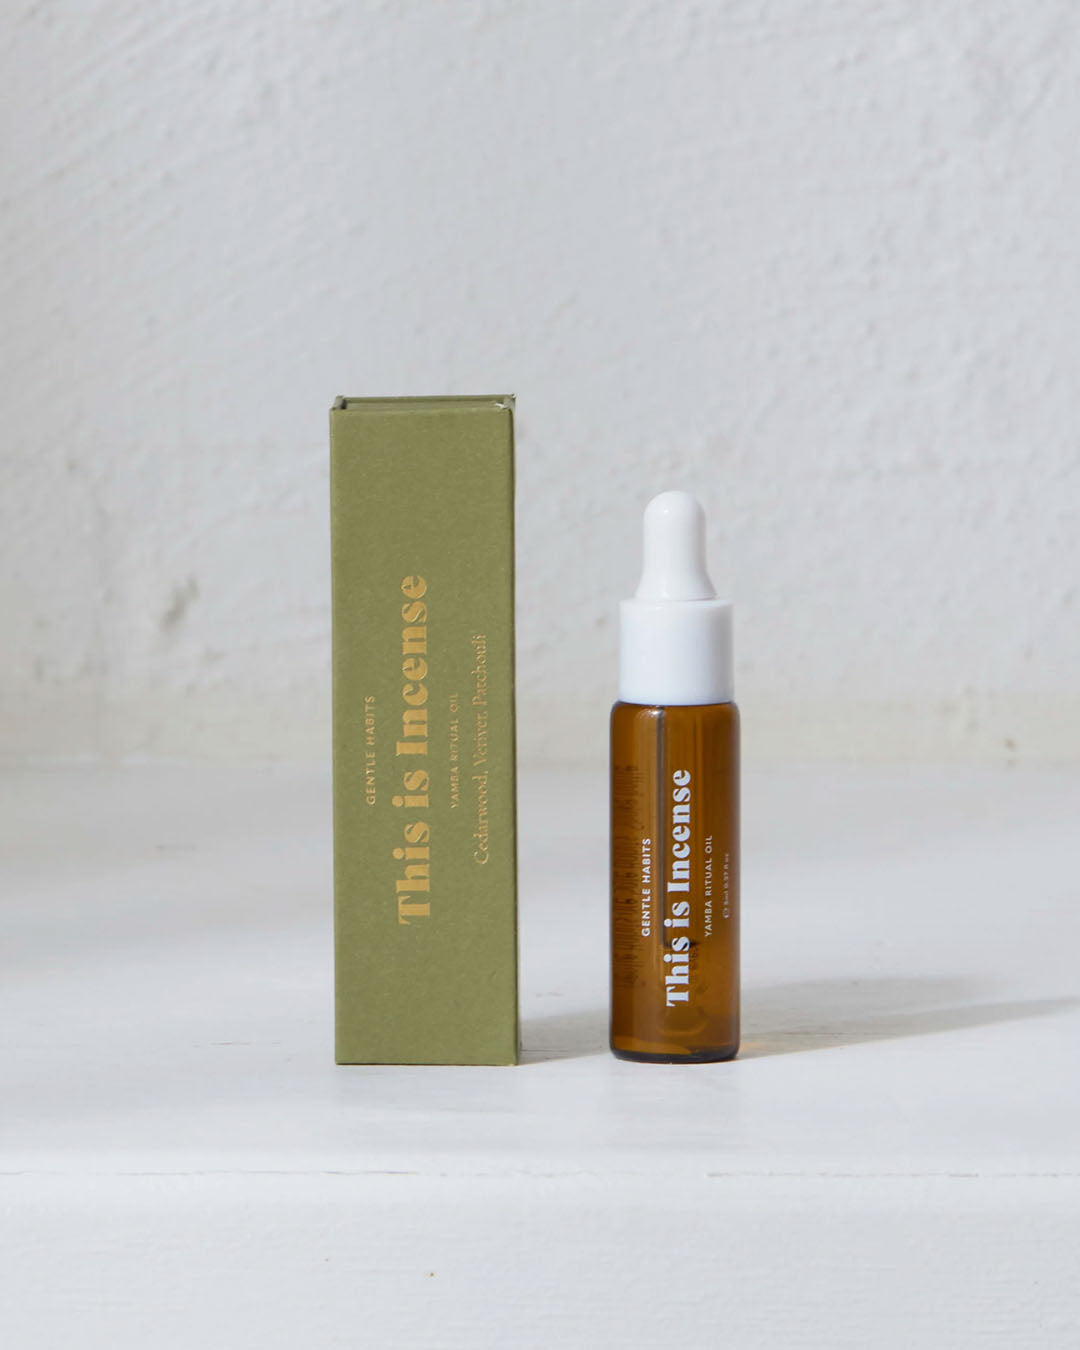 Ritual Diffuser Oil - Yamba Essential Oils by Gentle Habits - Prae Store